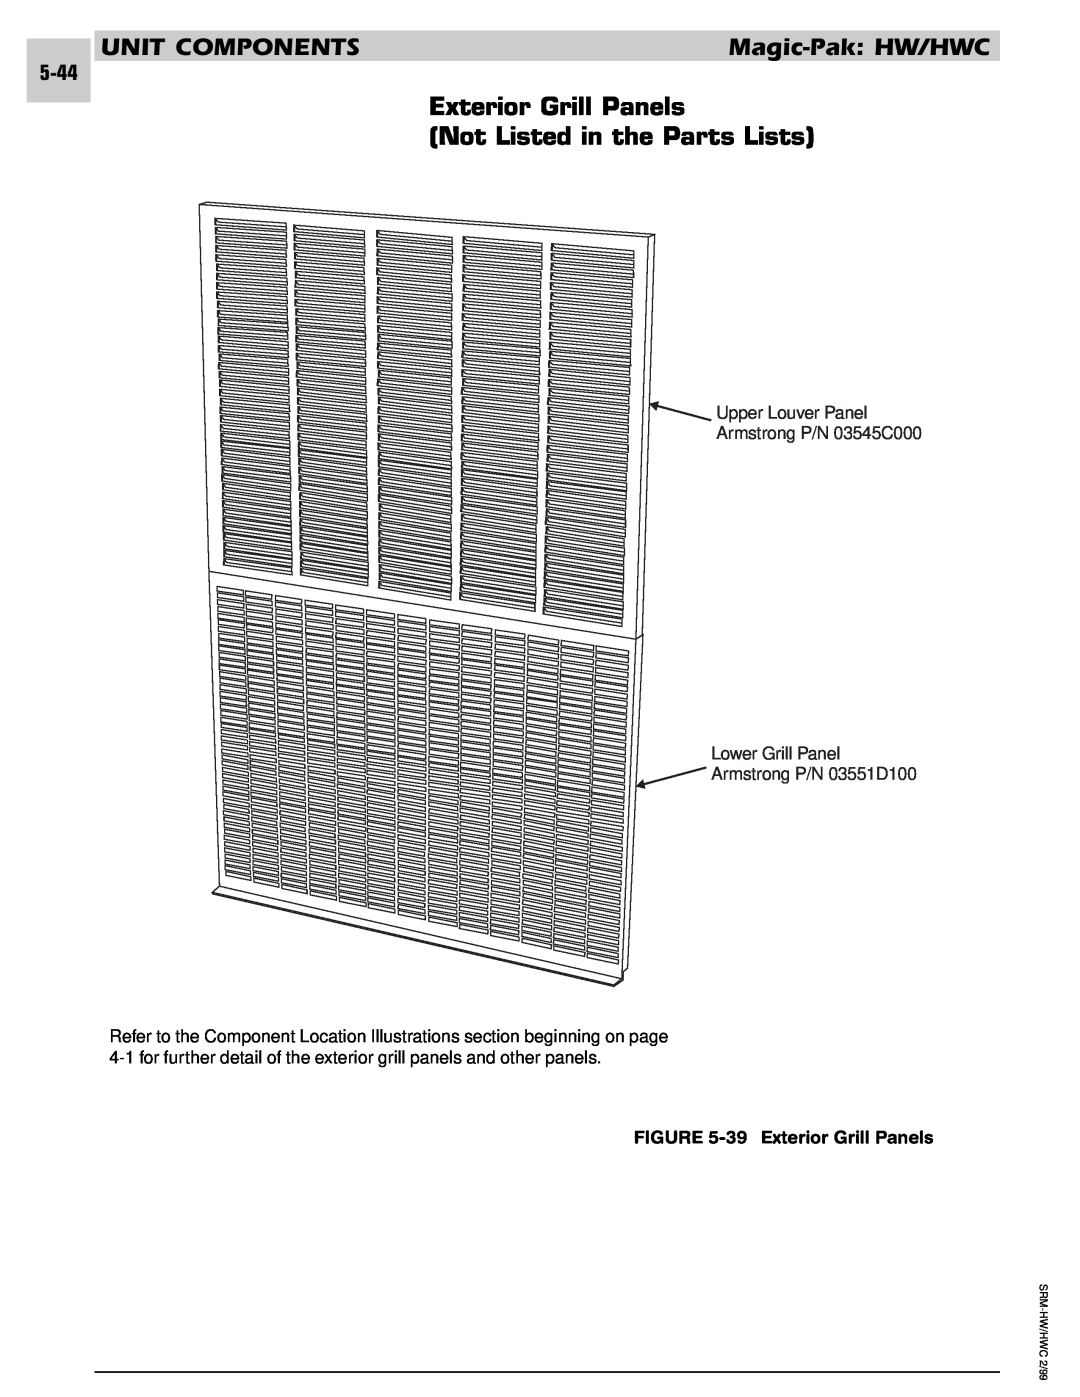 Armstrong World Industries 122, 243 Upper Louver Panel Armstrong P/N 03545C000 Lower Grill Panel, Armstrong P/N 03551D100 